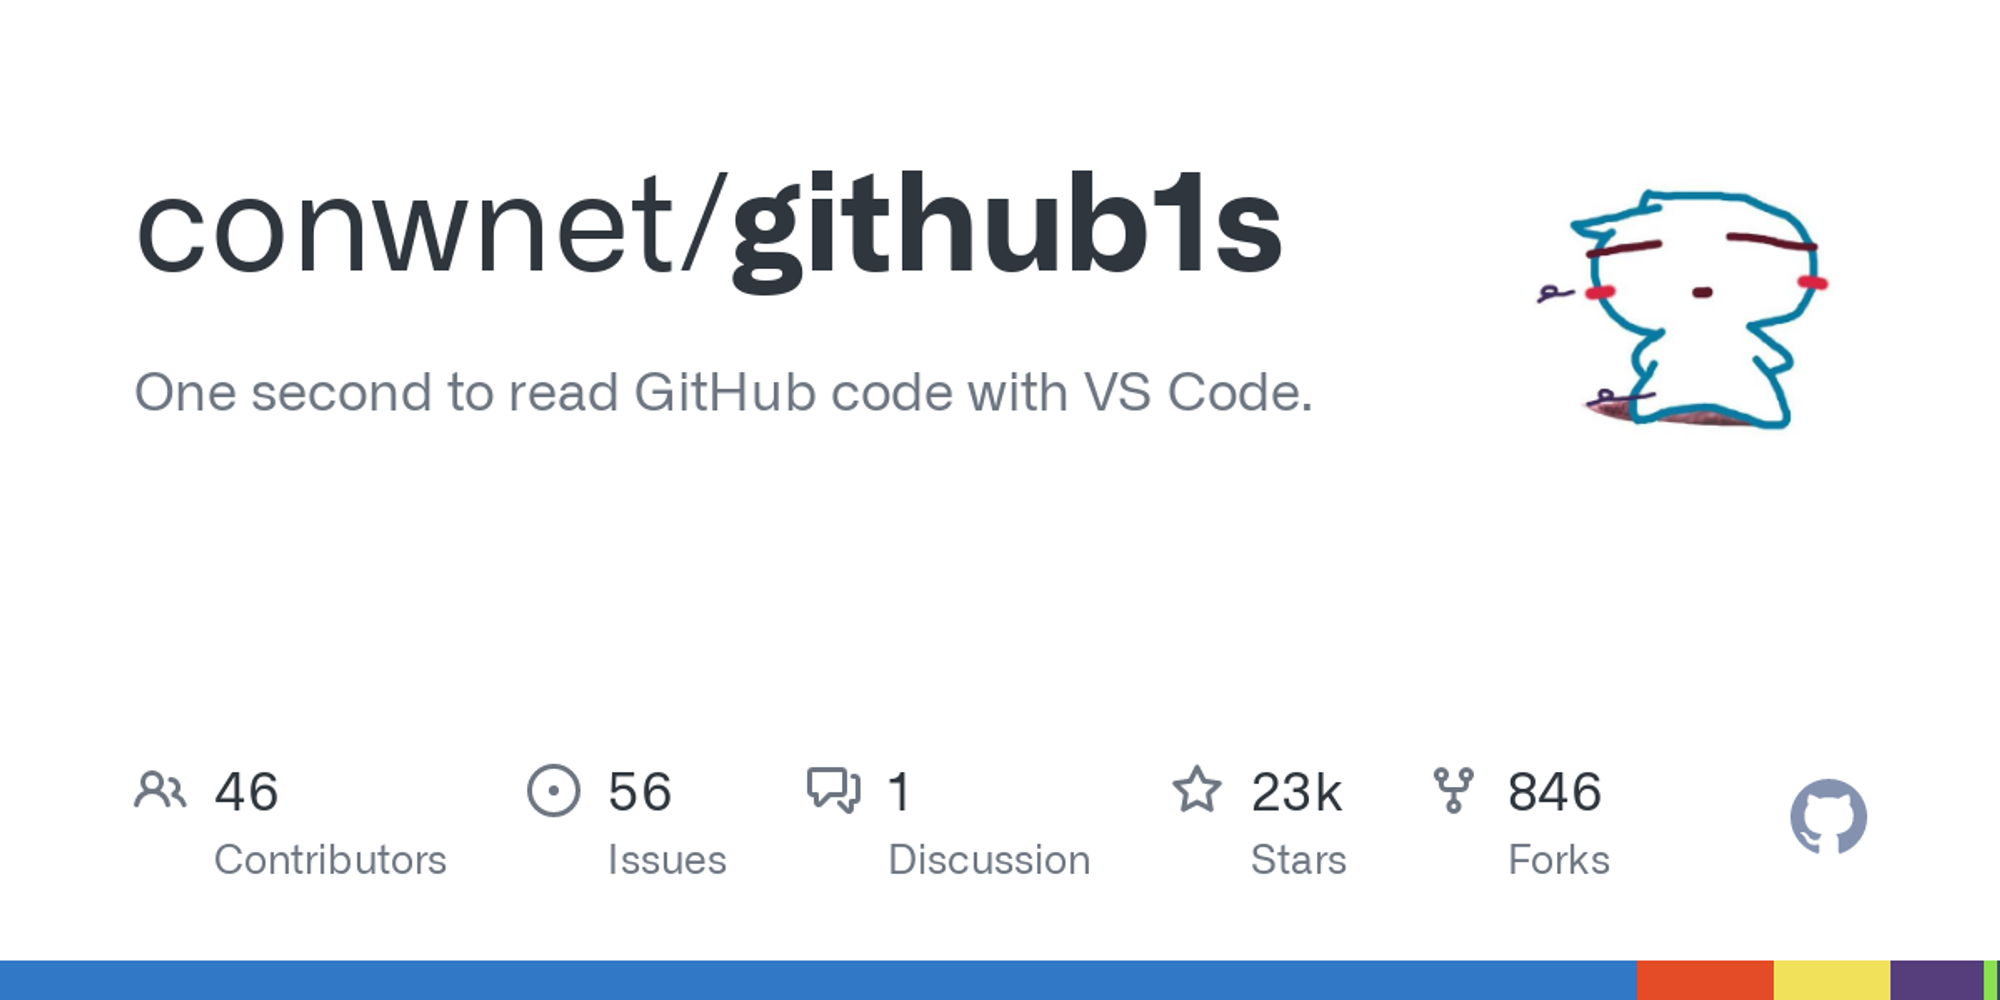 GitHub - conwnet/github1s: One second to read GitHub code with VS Code.